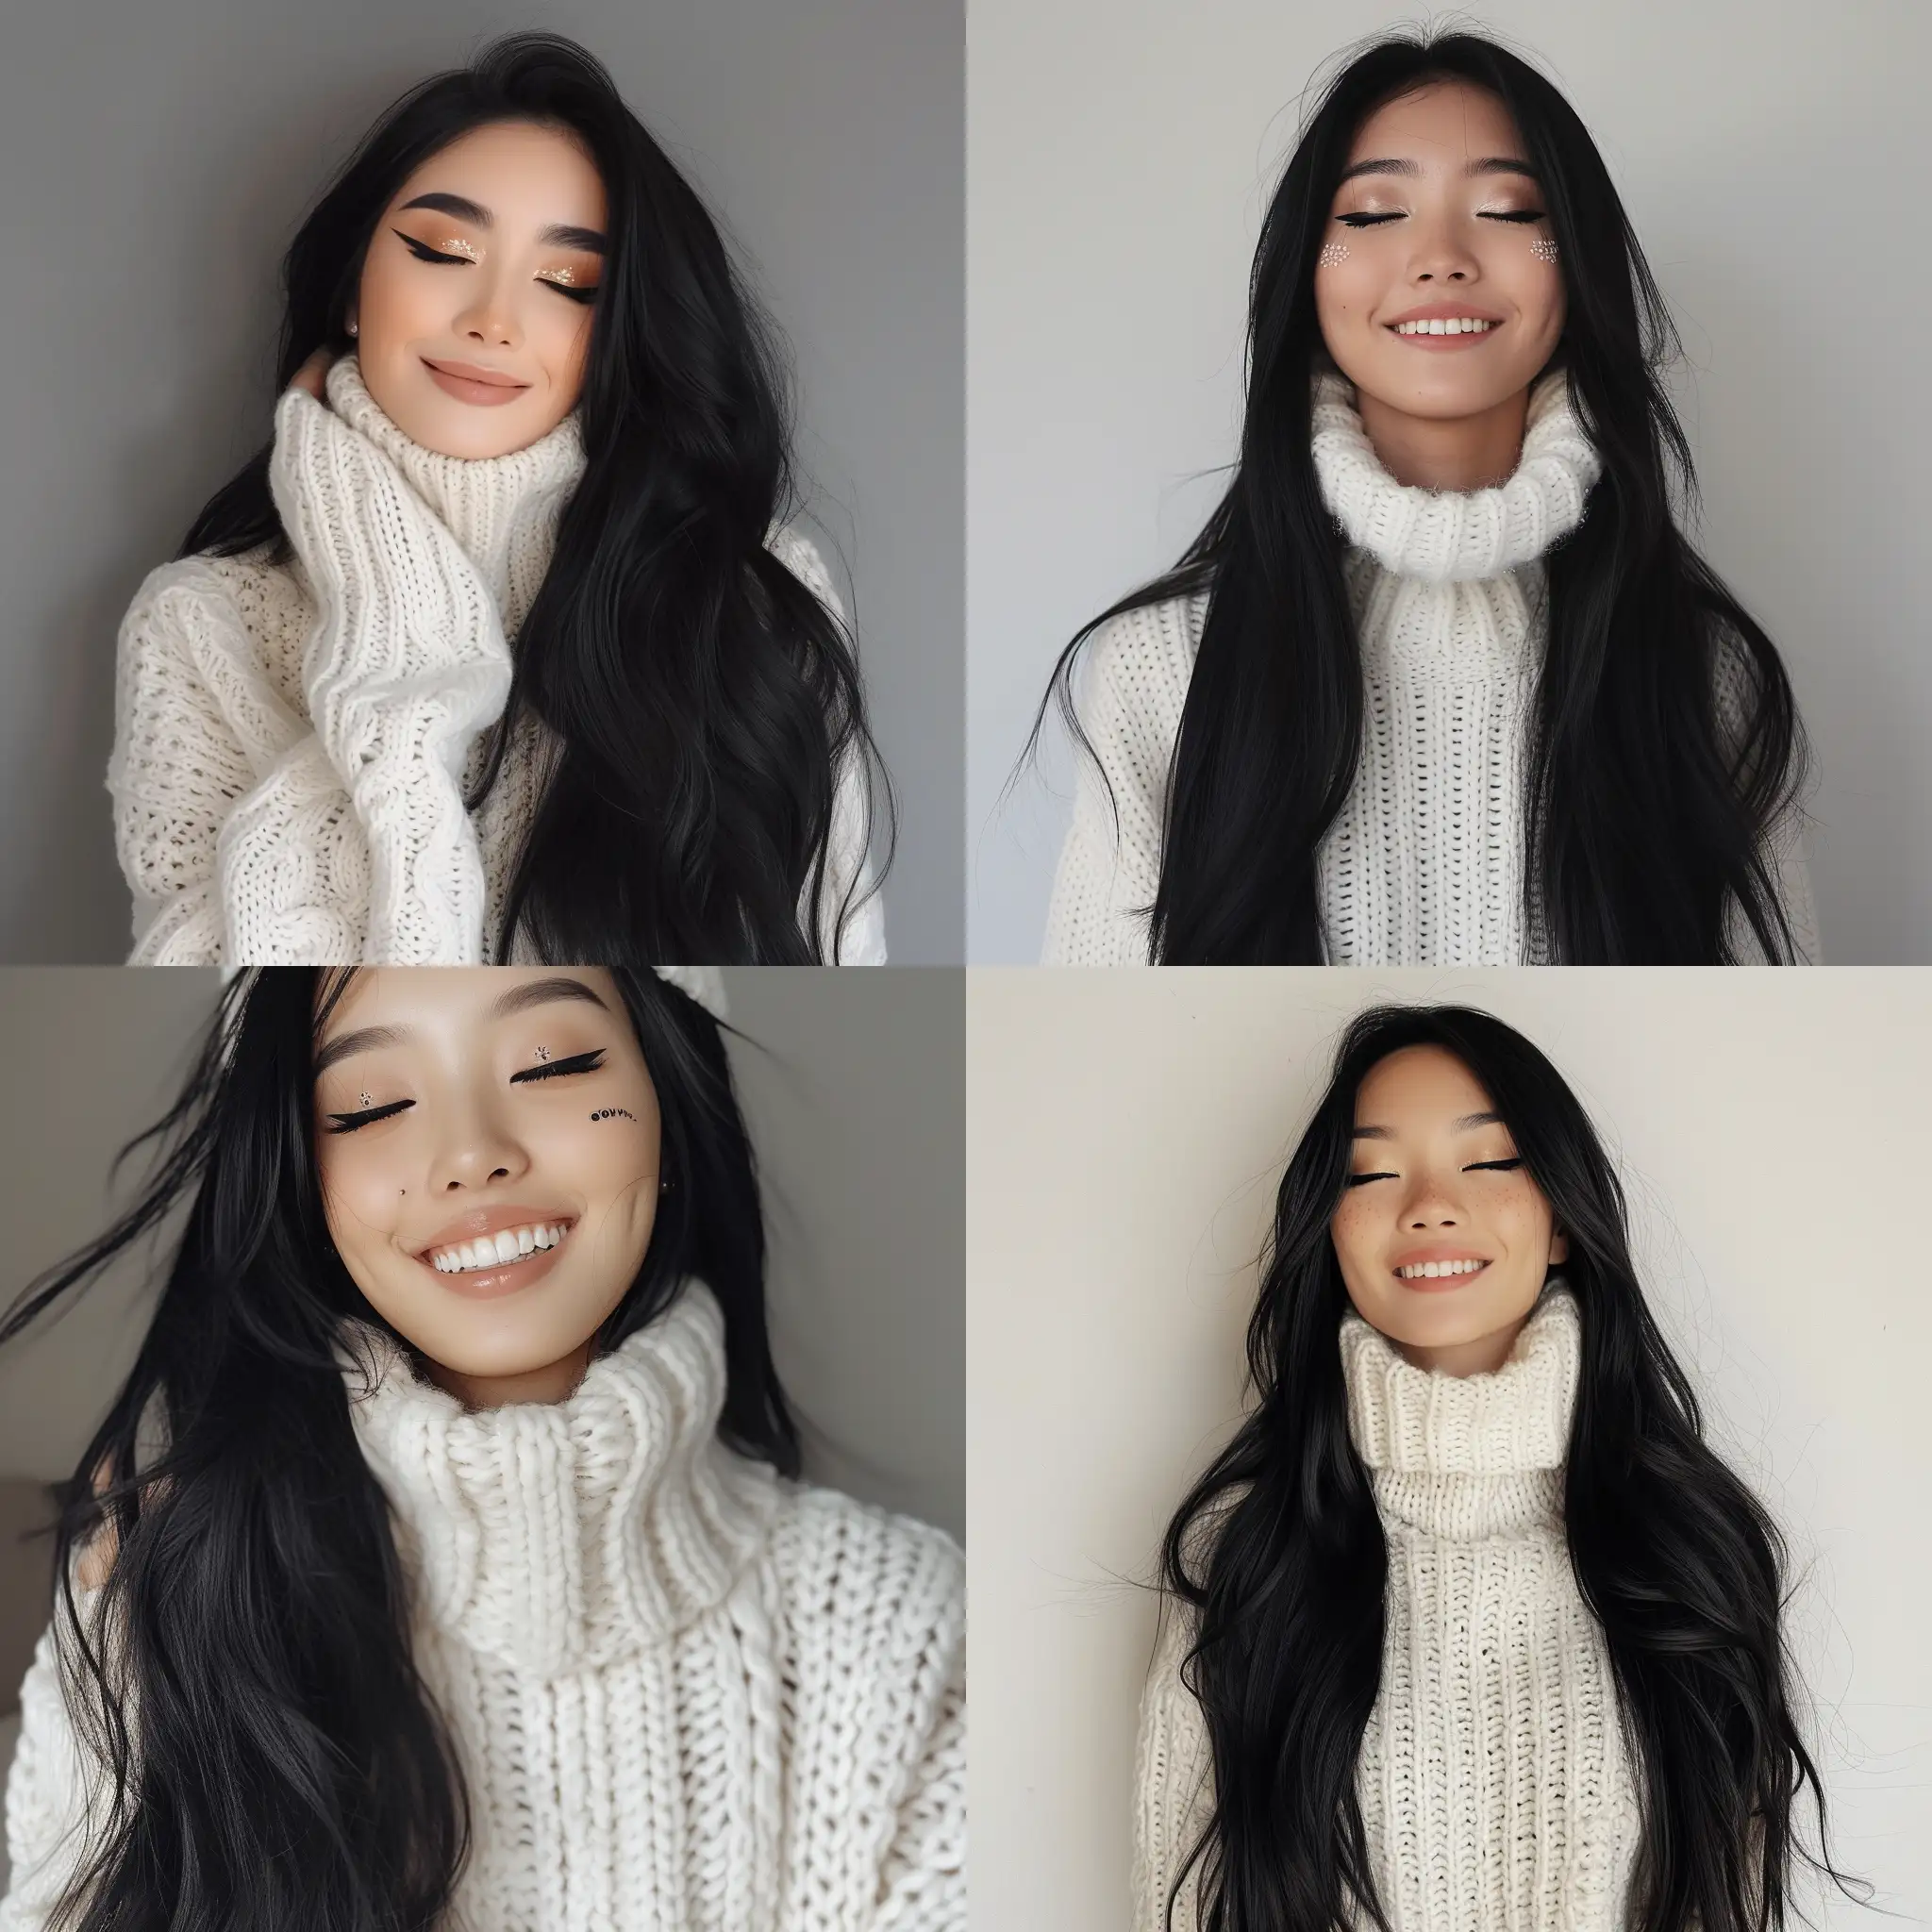 Asian-Girl-with-Long-Black-Hair-in-Knitted-White-Sweater-Aesthetic-Instagram-Profile-Picture